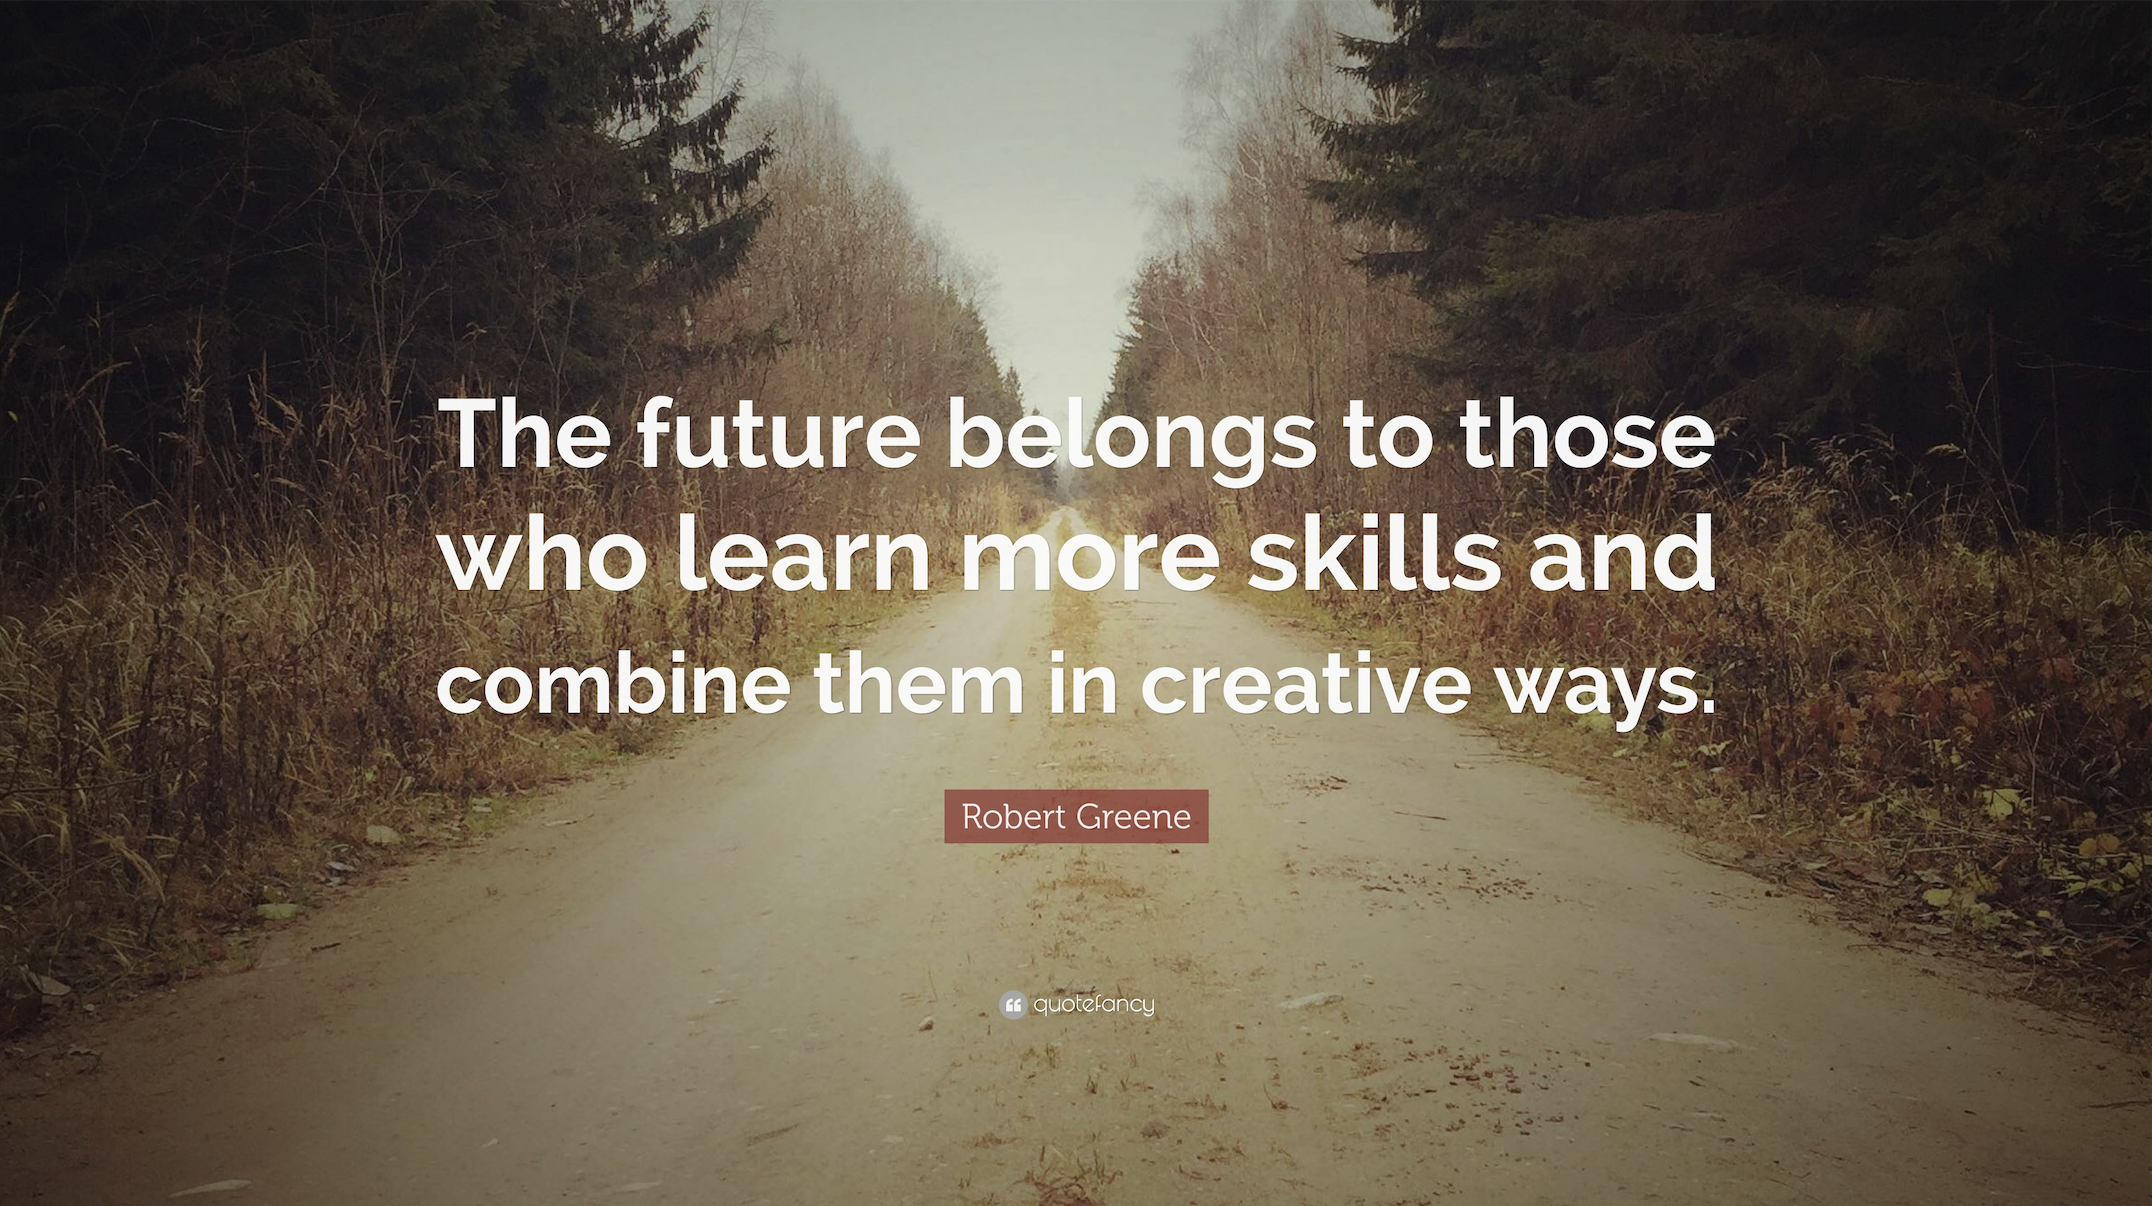 Robert Greene quote. The future belongs to those who learn more skills and combine them in creative ways | Robert Greene quotes, Greene quotes, quote, Robert Greene